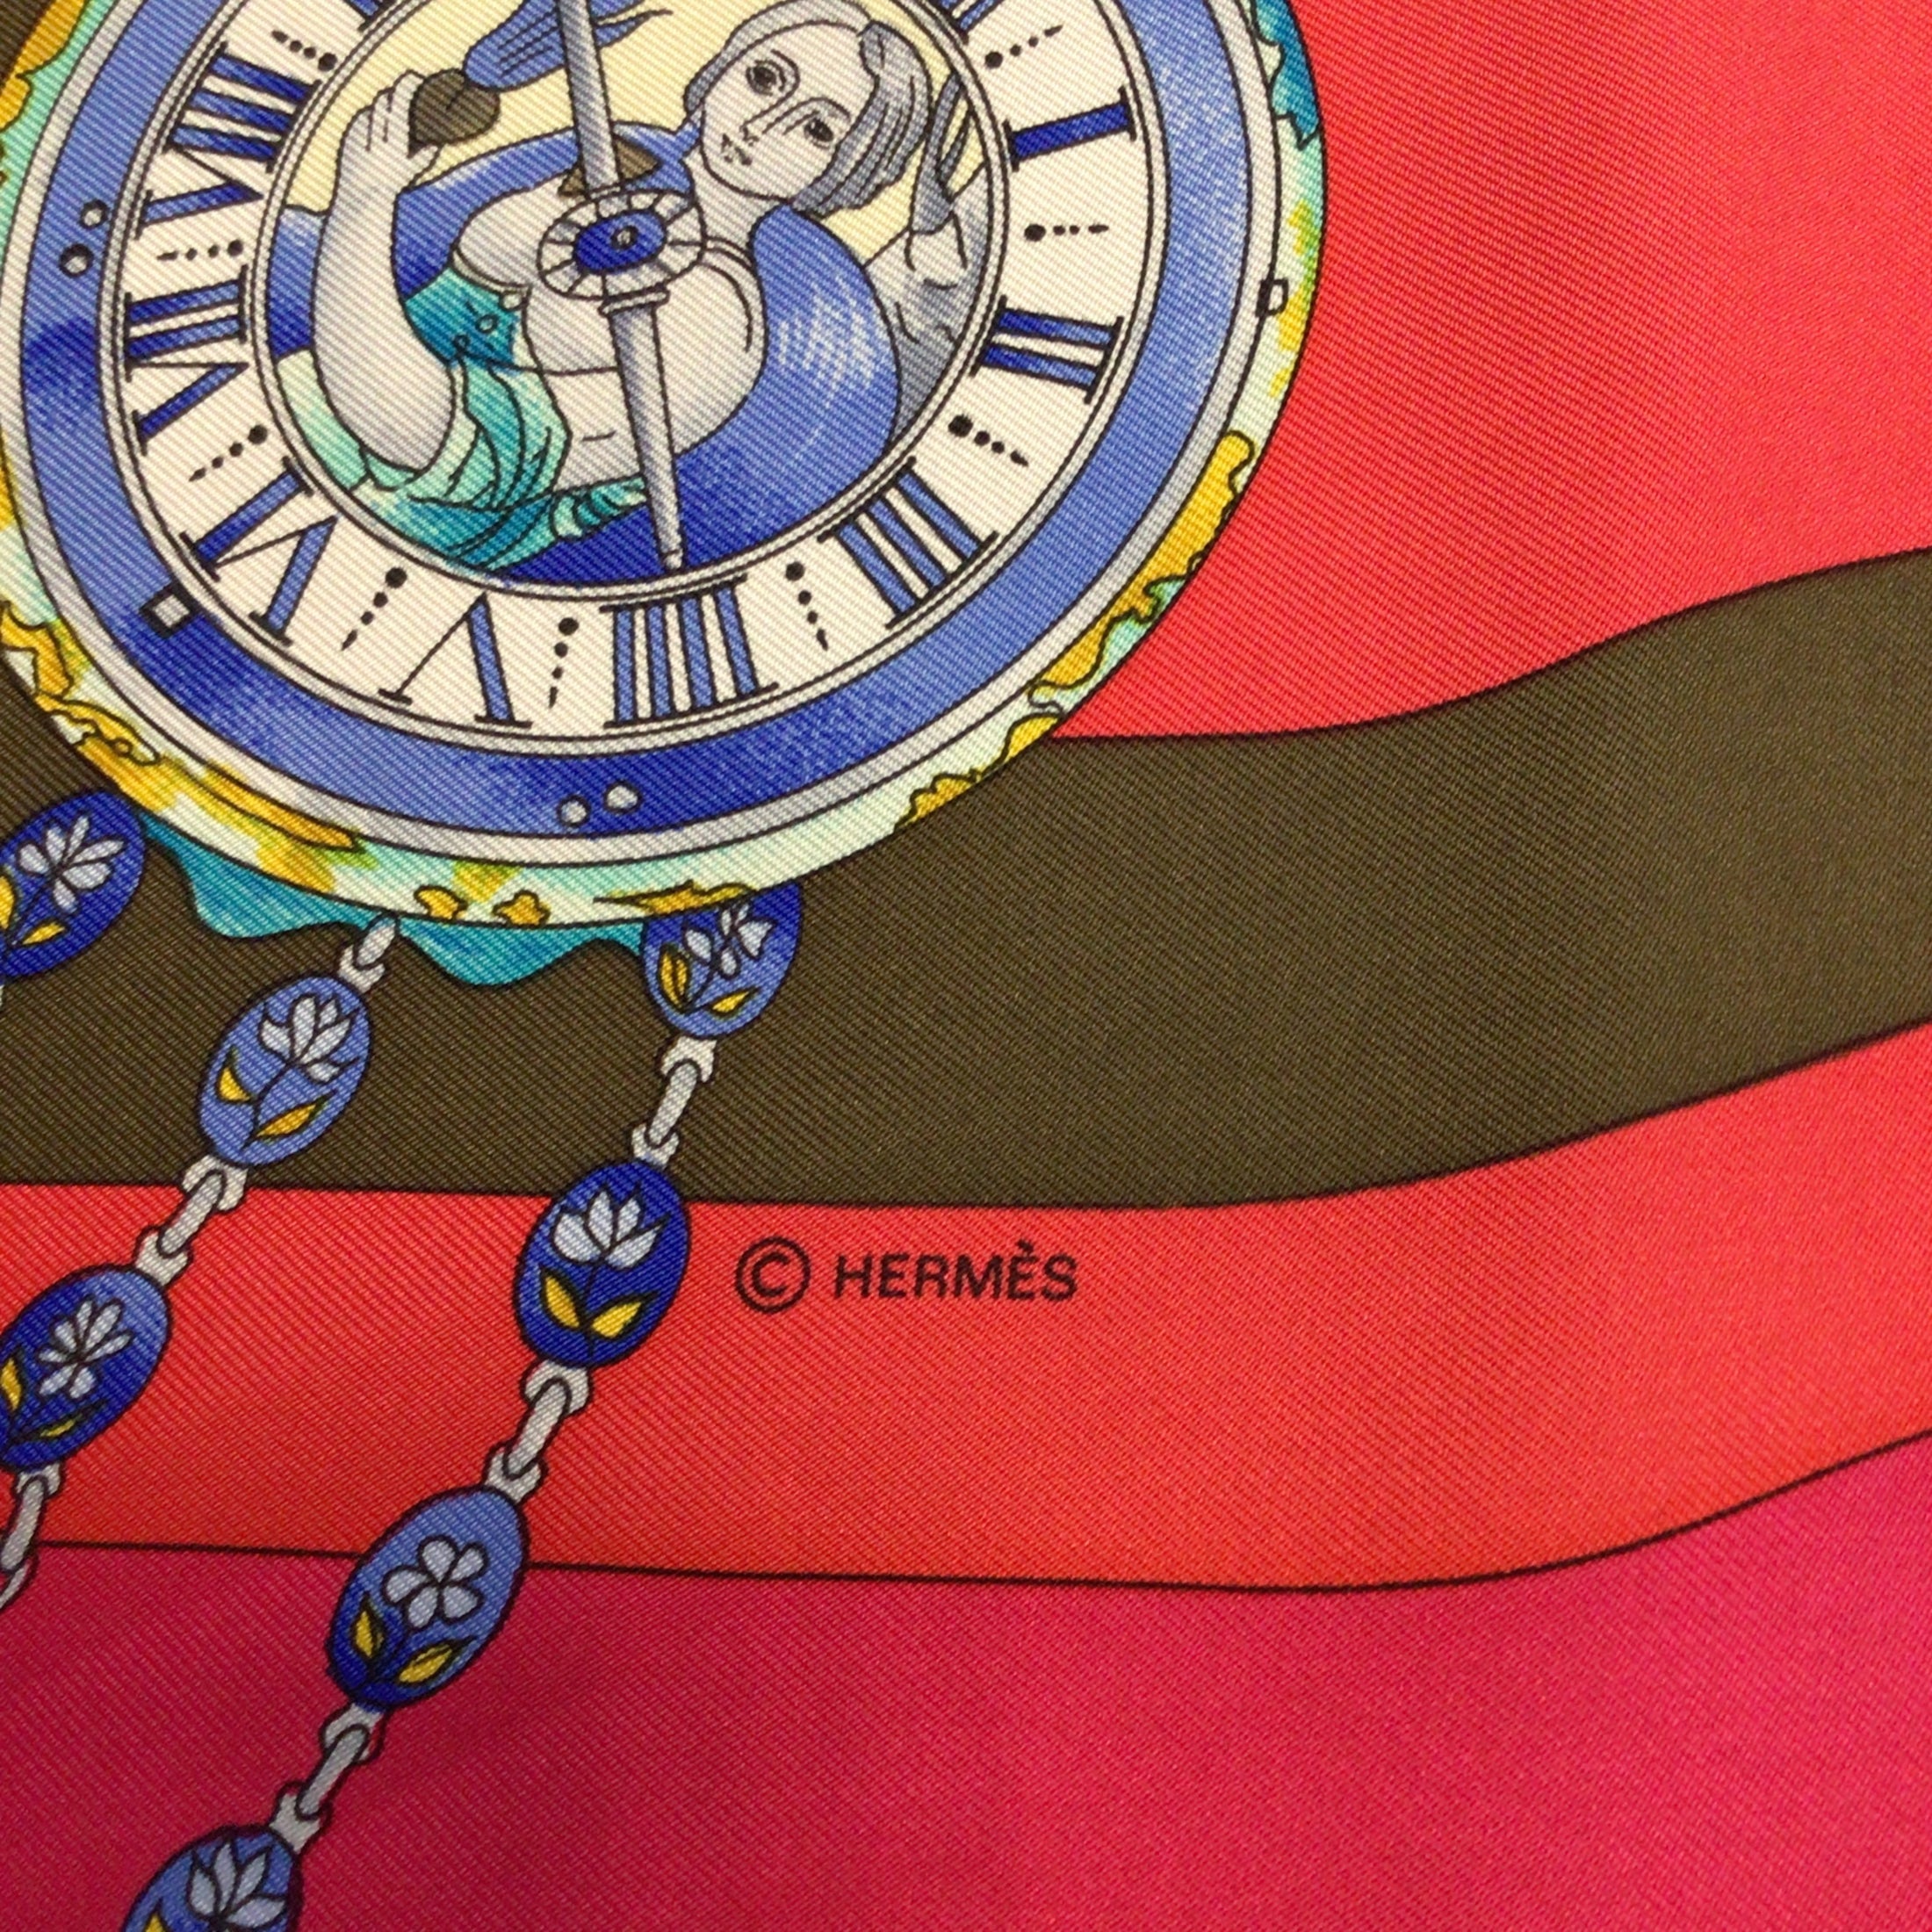 Hermes Fuchsia Pink / Red Multi La Ronde des Heures Square Silk Twill Scarf